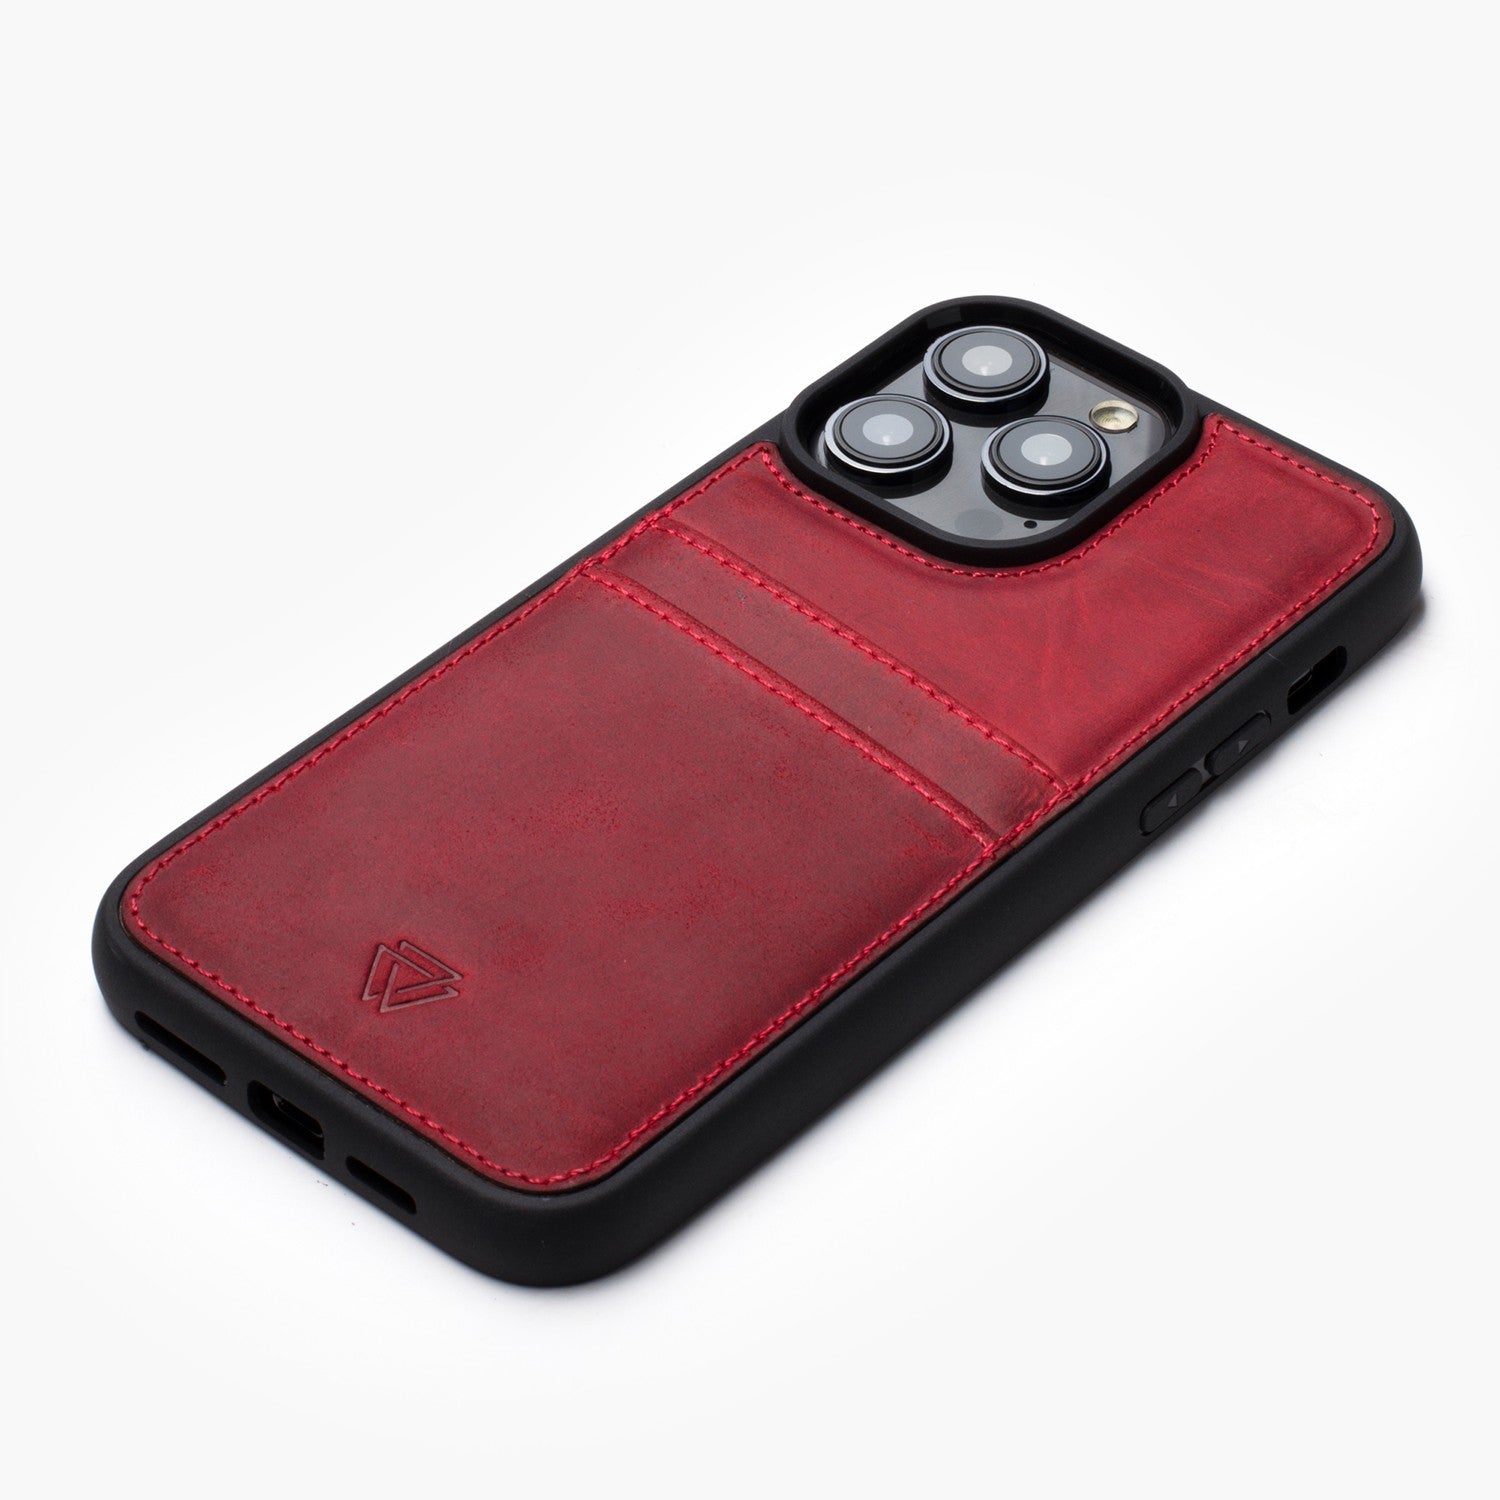 Wachikopa leather Back Cover C.C. Case for iPhone 12 Mini Red